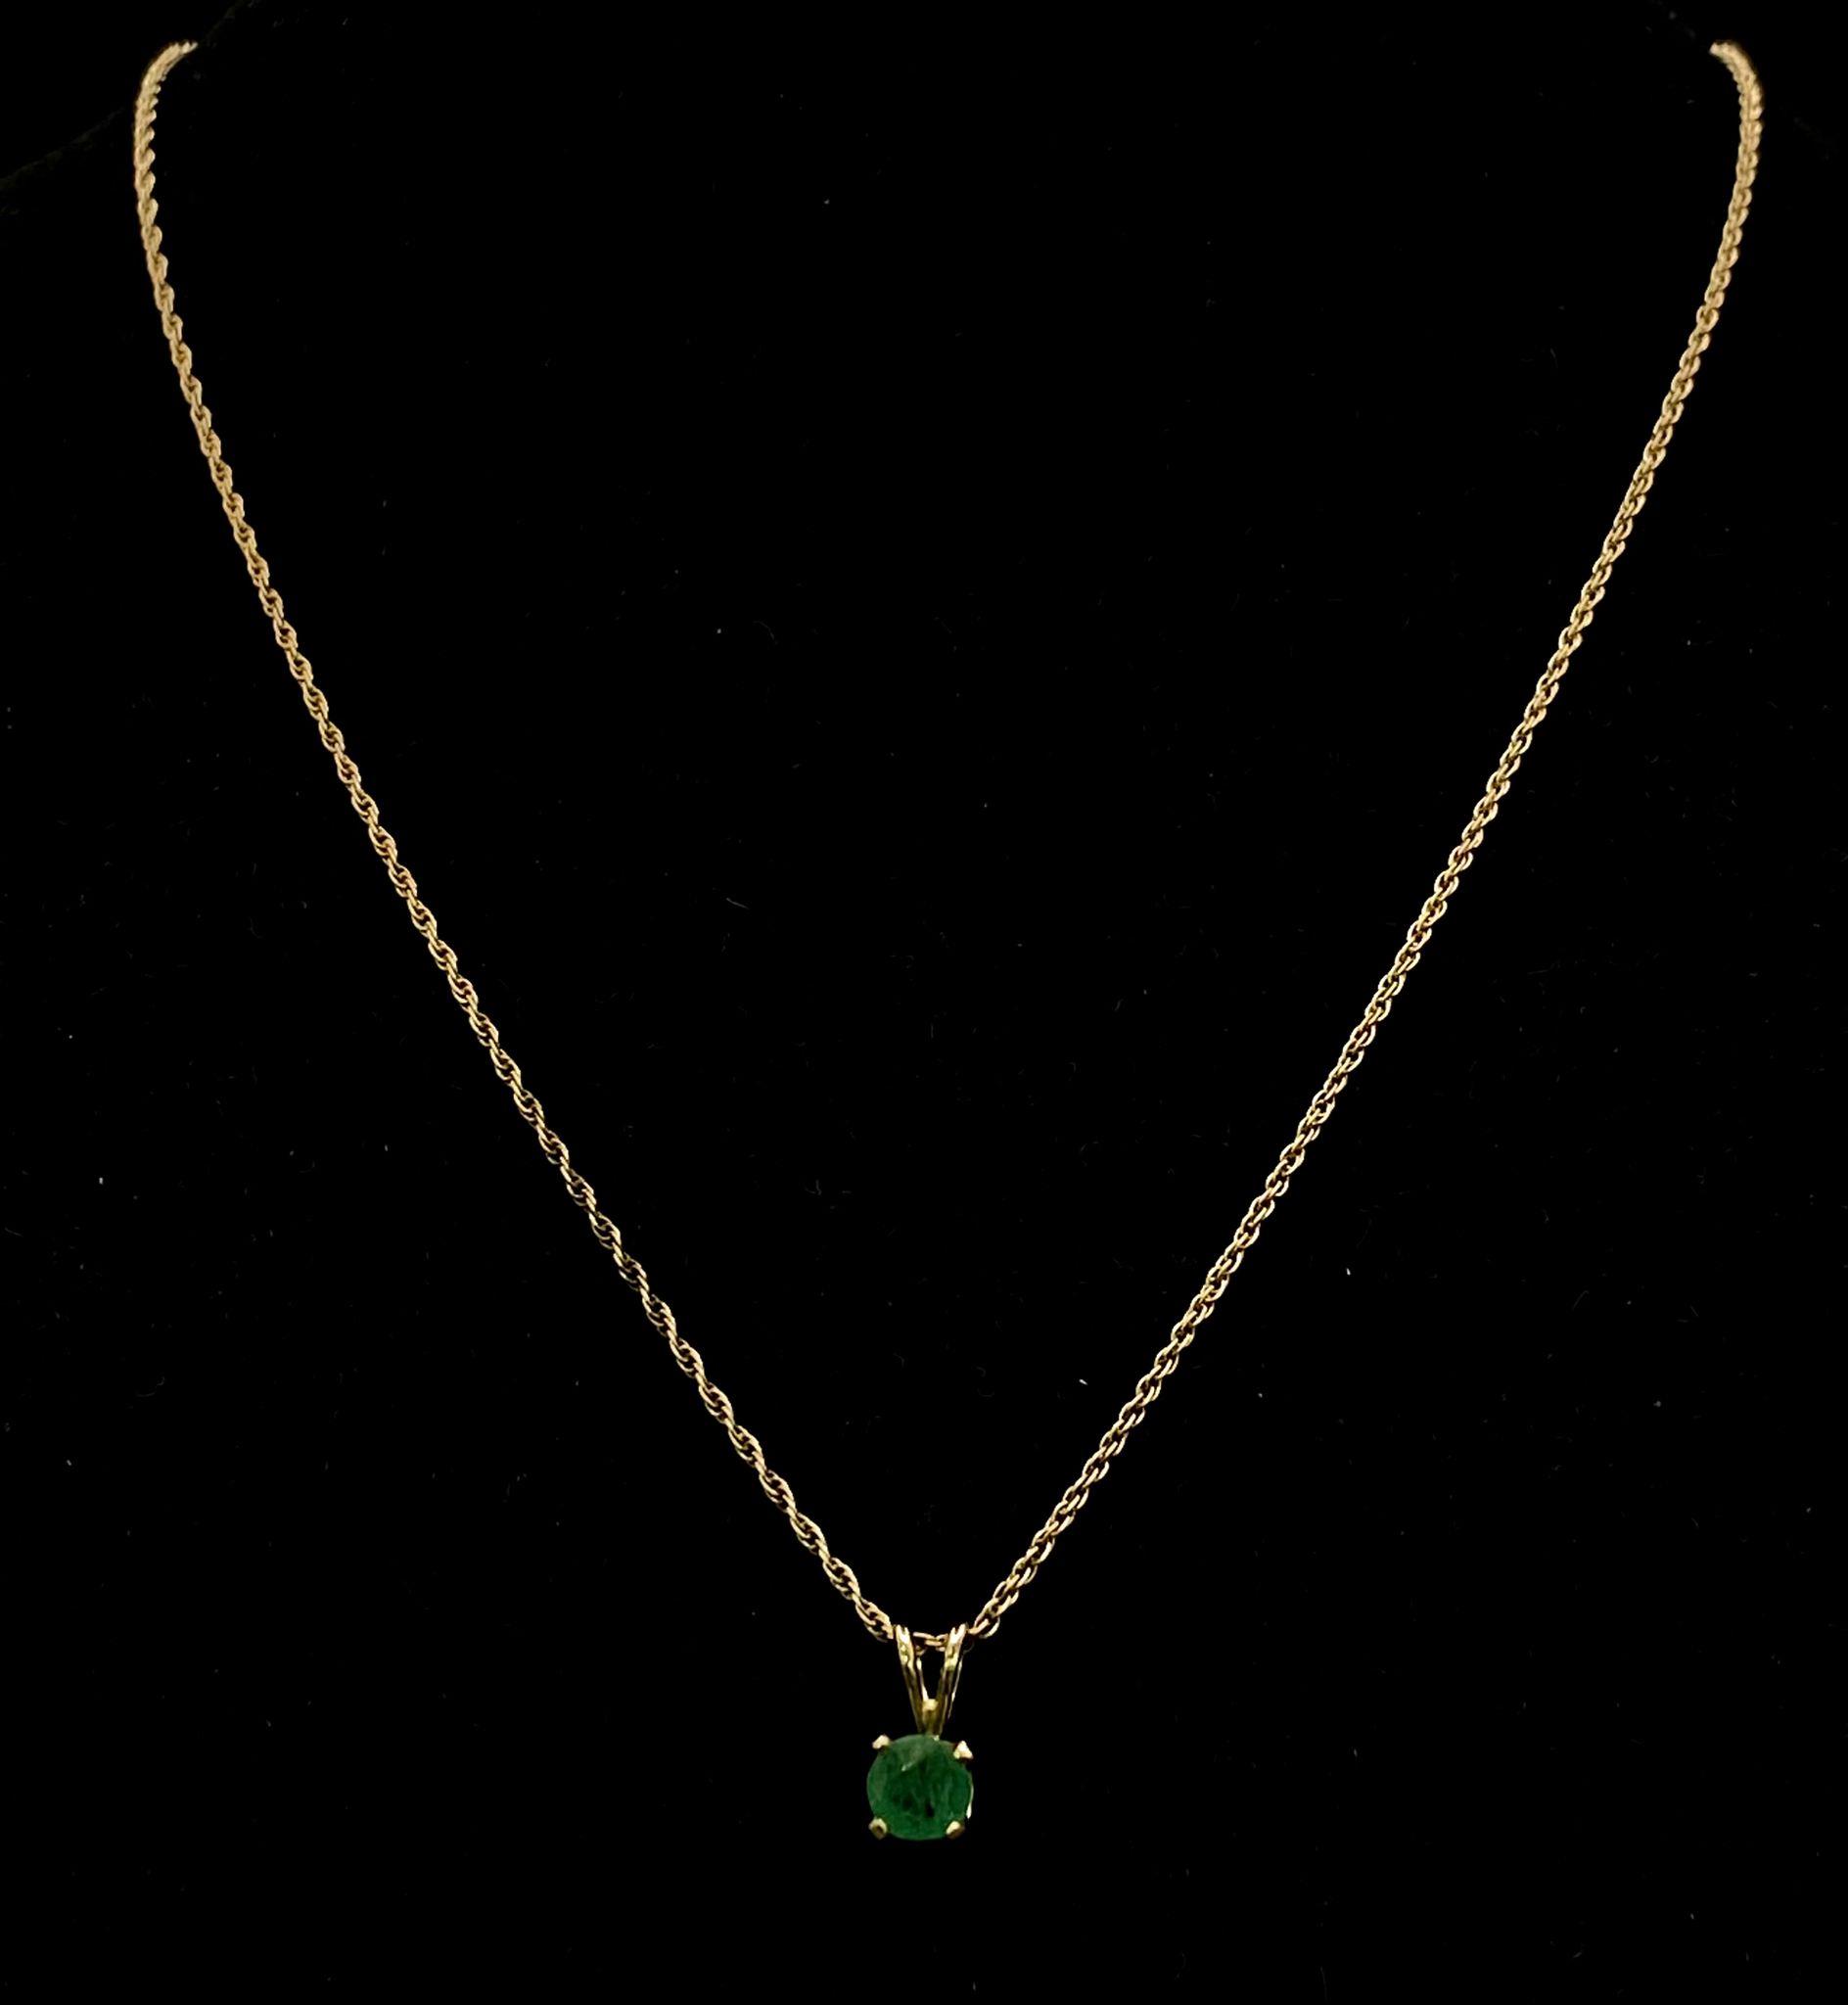 A 14k Yellow Gold Emerald Pendant on a 14k Yellow Gold Necklace. 12mm and 46cm. 2.53g total weight.